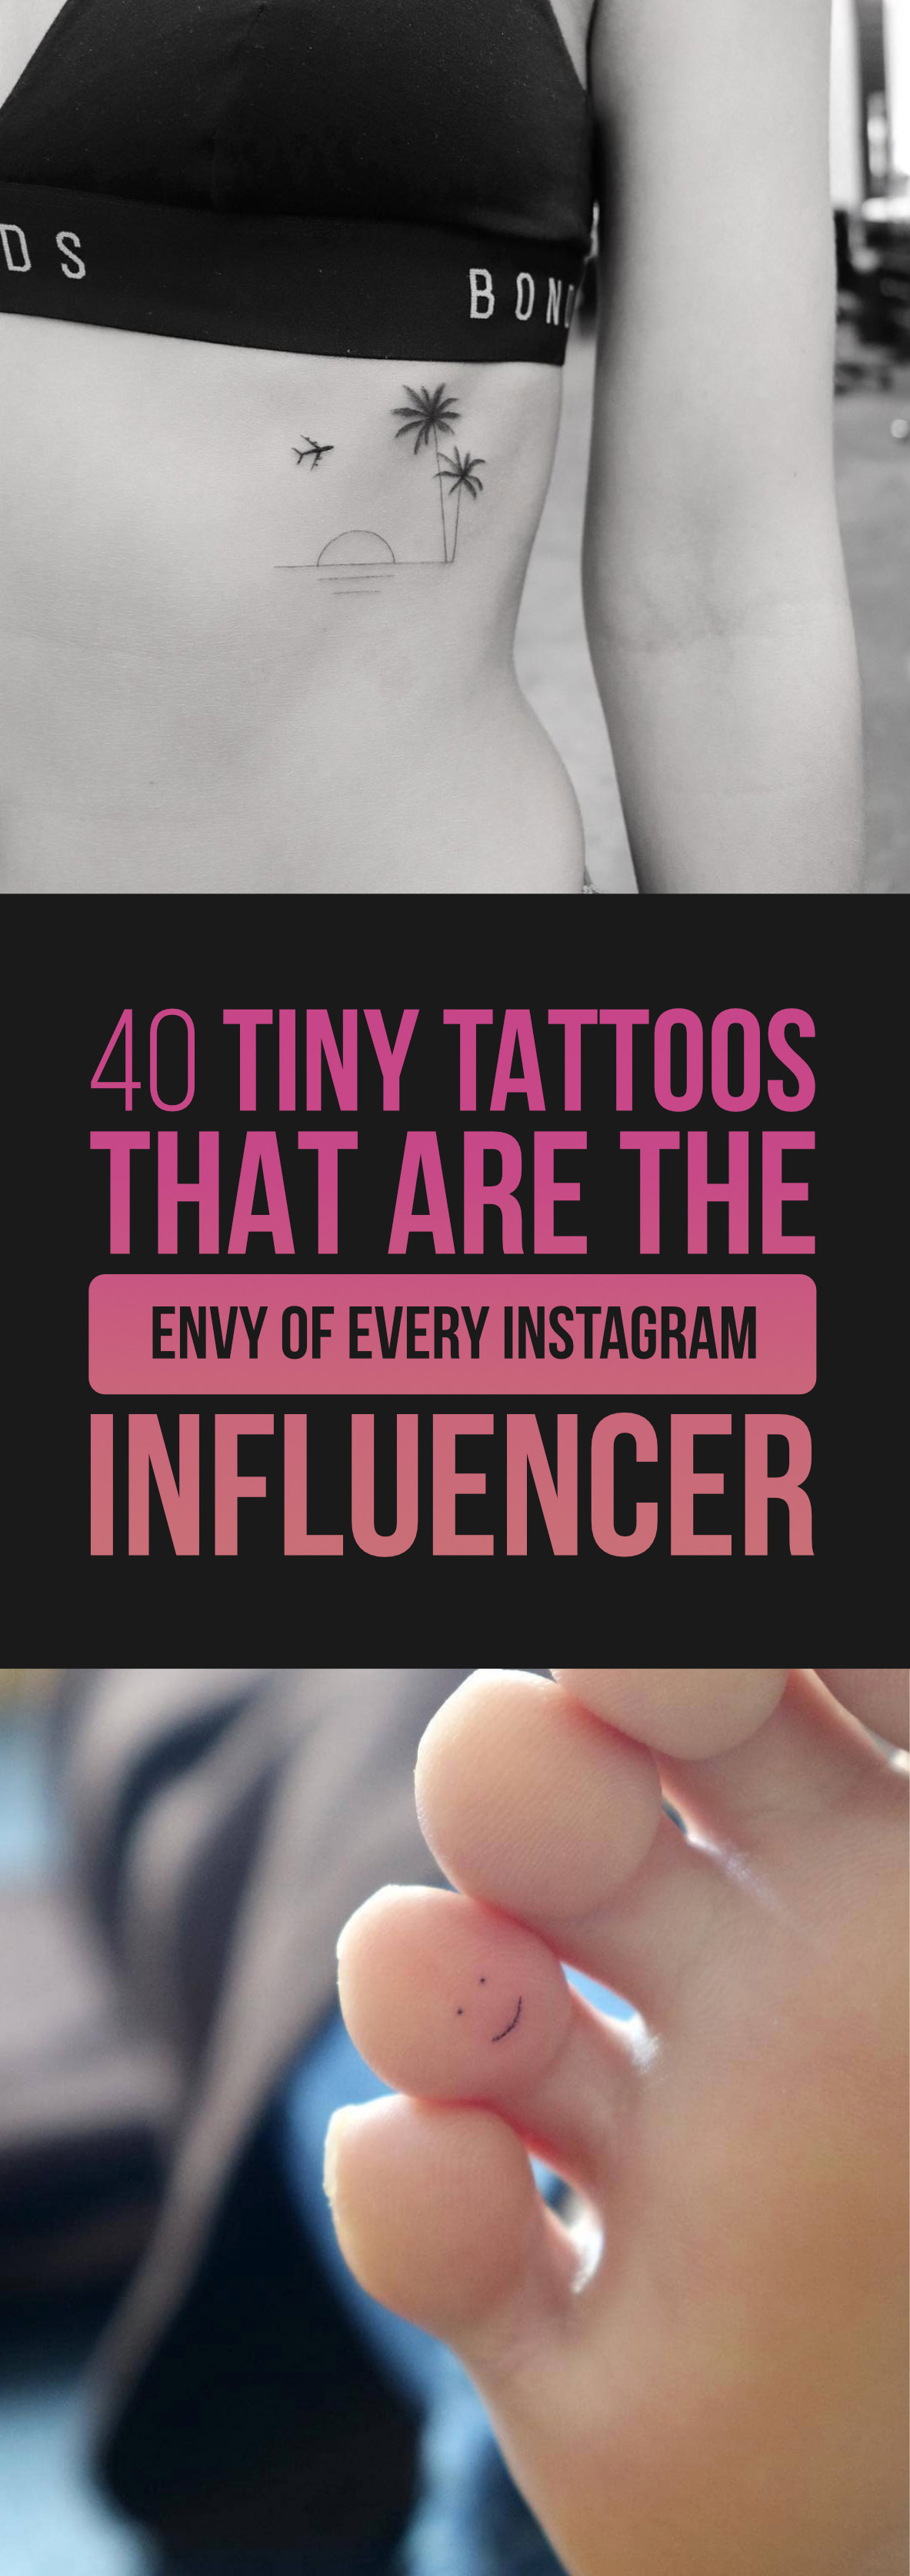 40 Tiny Tattoos That Are the Envy of Every Insta Influencer